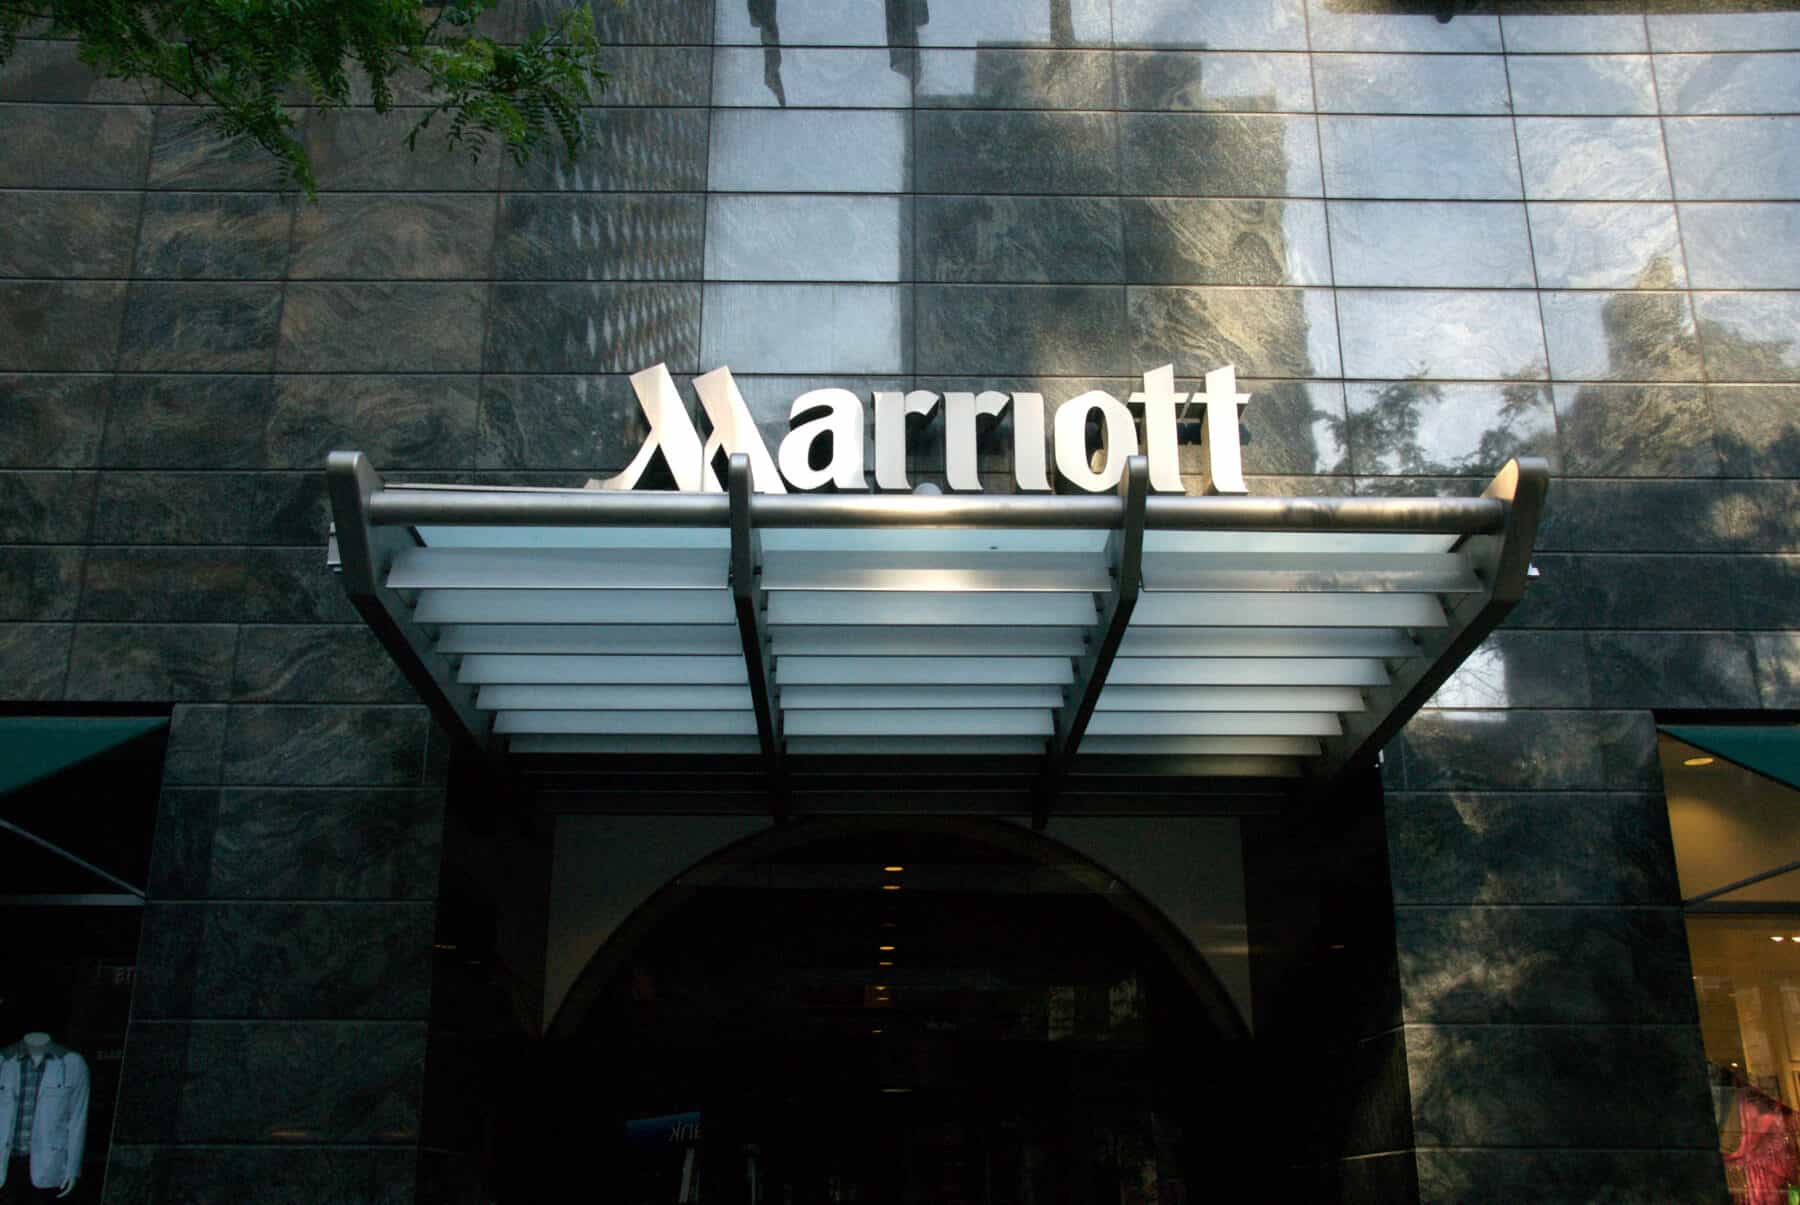 Custom Fabrication of Oversized Stainless Steel Metal Canopy for Marriott from Construction Specialty Projects by Commercial Builder & General Contractor Structural Enterprises